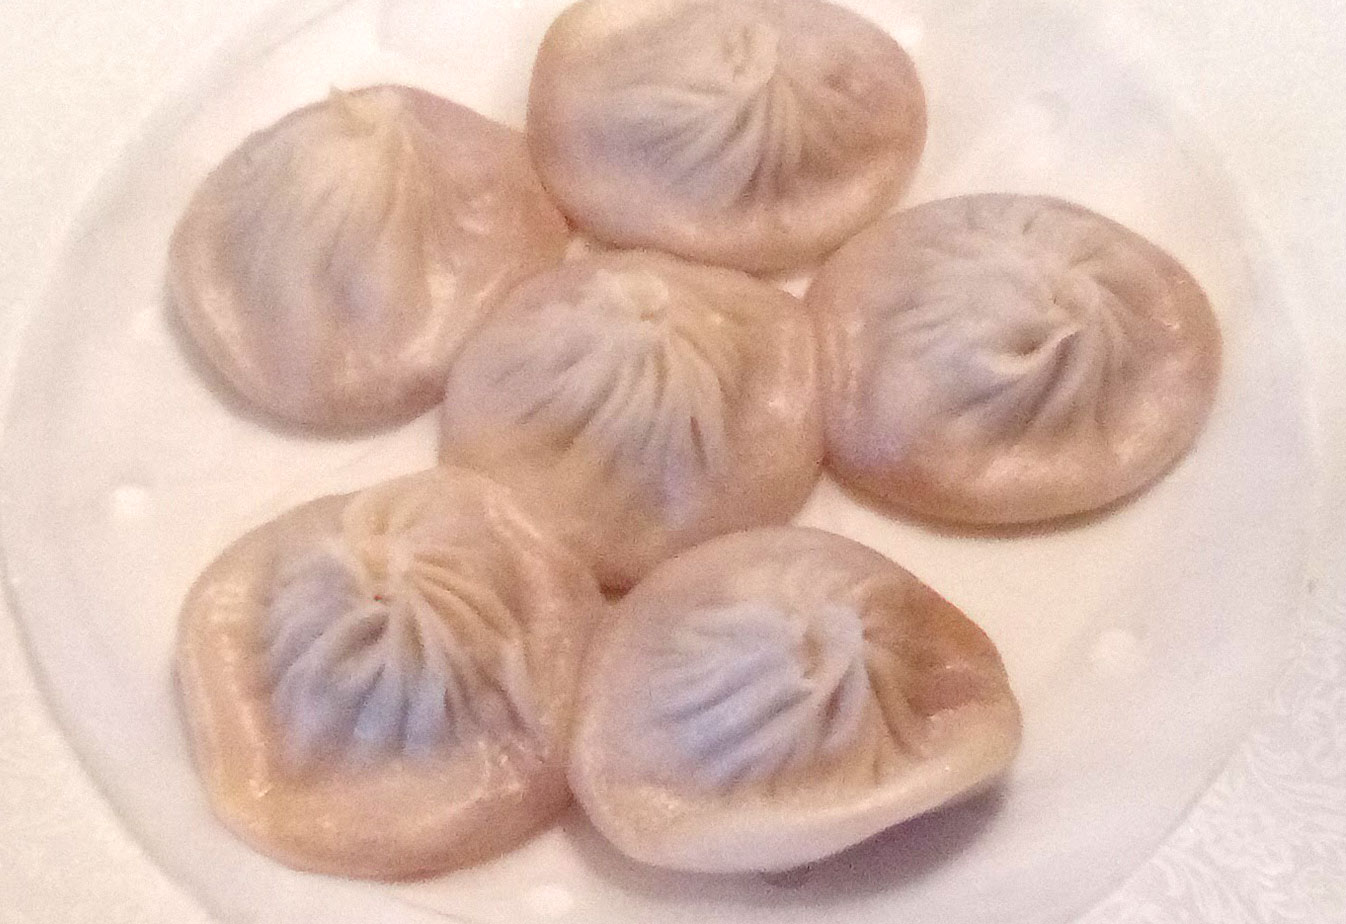 On a white plate, there are six steamed dumplings with rippled middles. Photo by Paul Young.